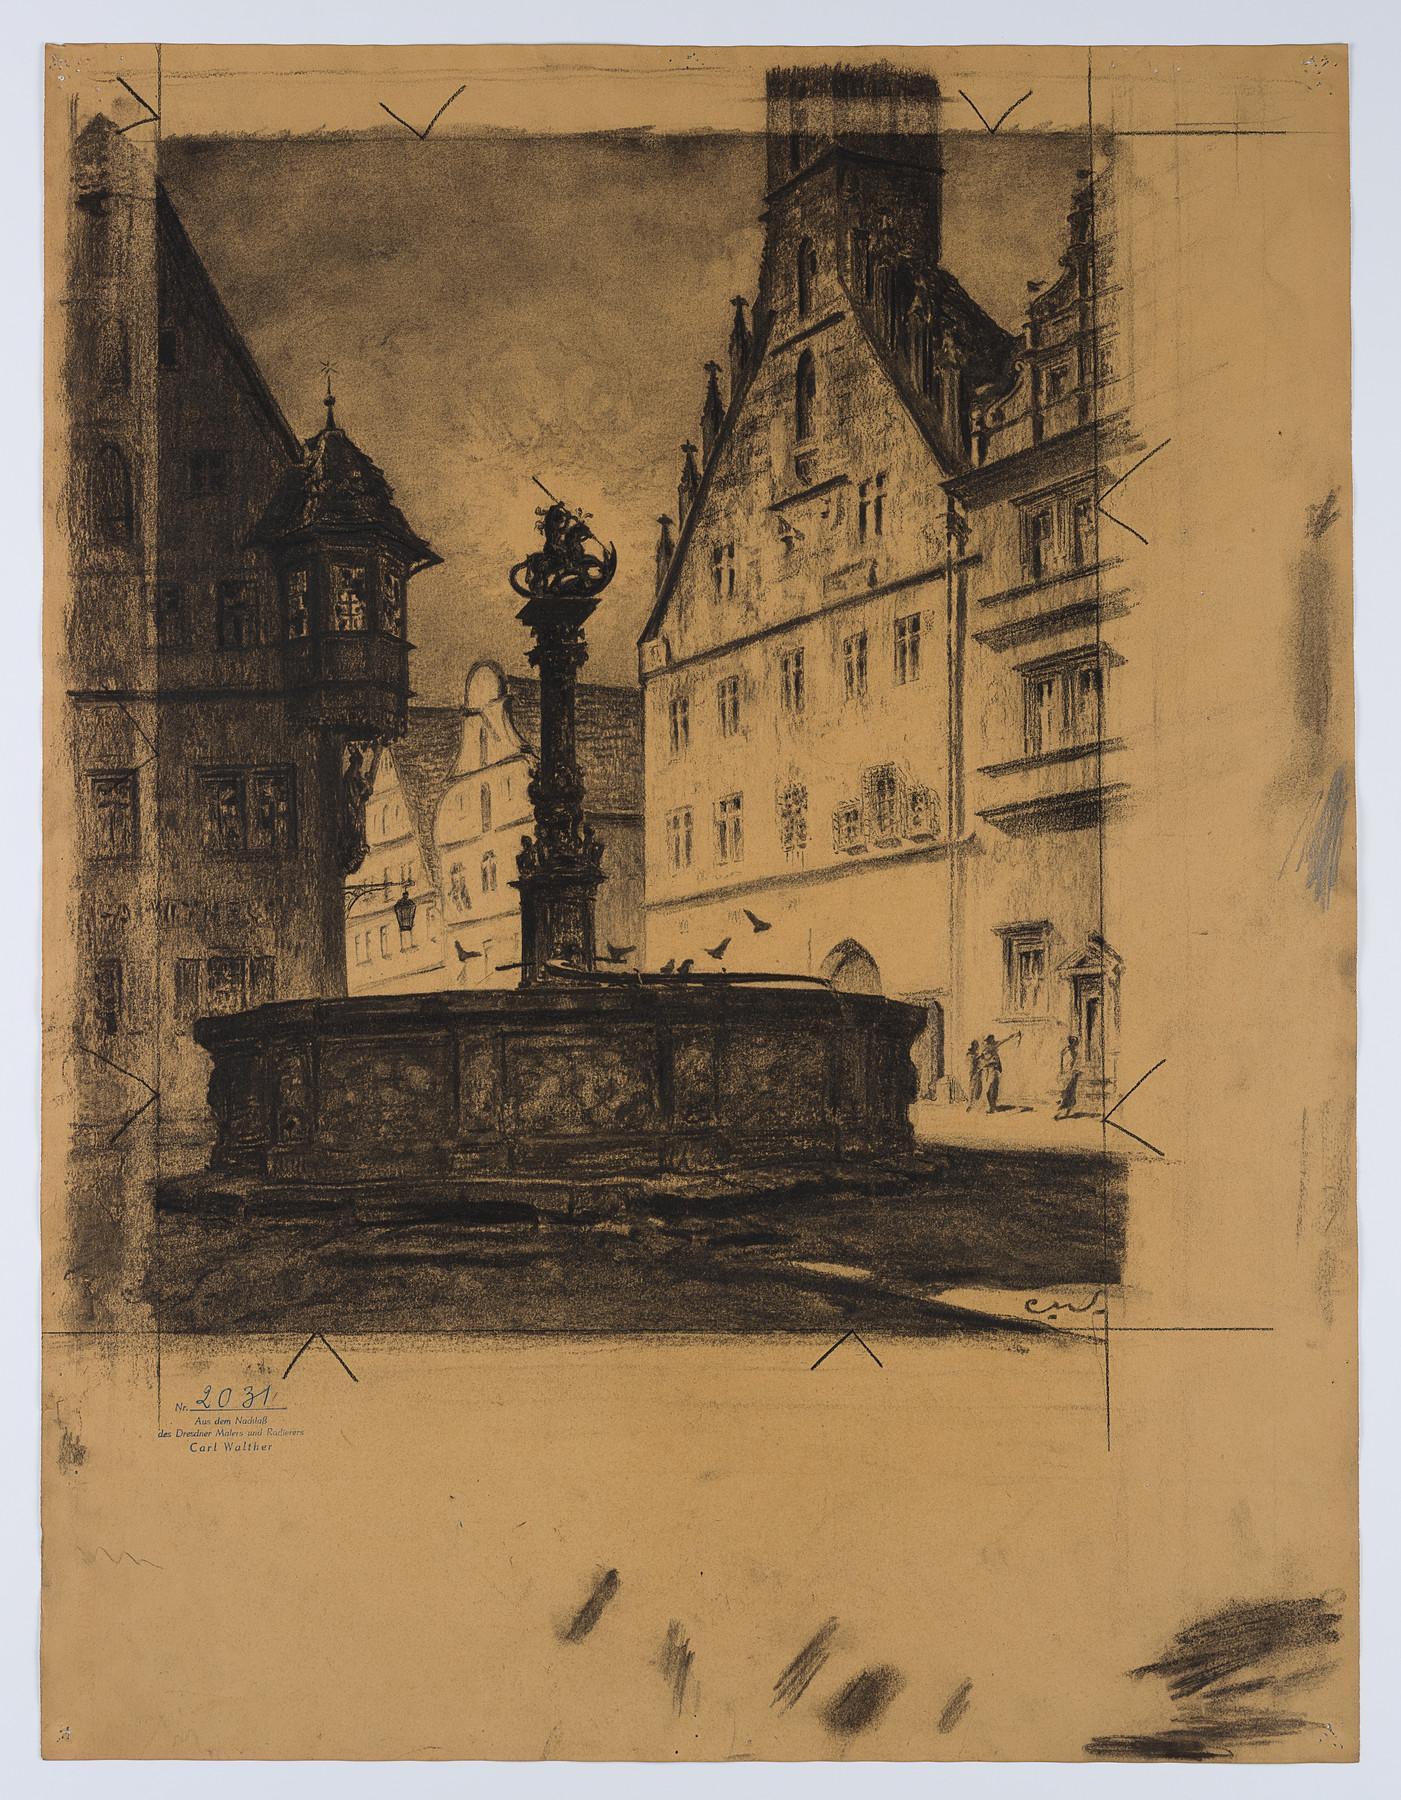 St George's Fountain and Town Hall in Rothenburg ob der Tauber - Art by Carl August Walther